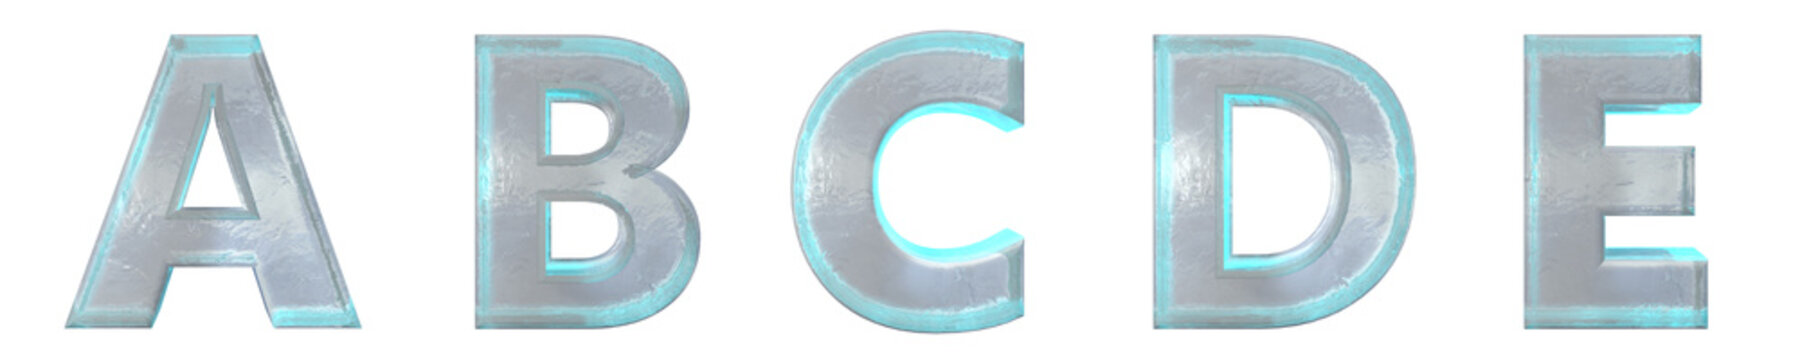 Font of ice or glass. Letters A,B,C,D,E.